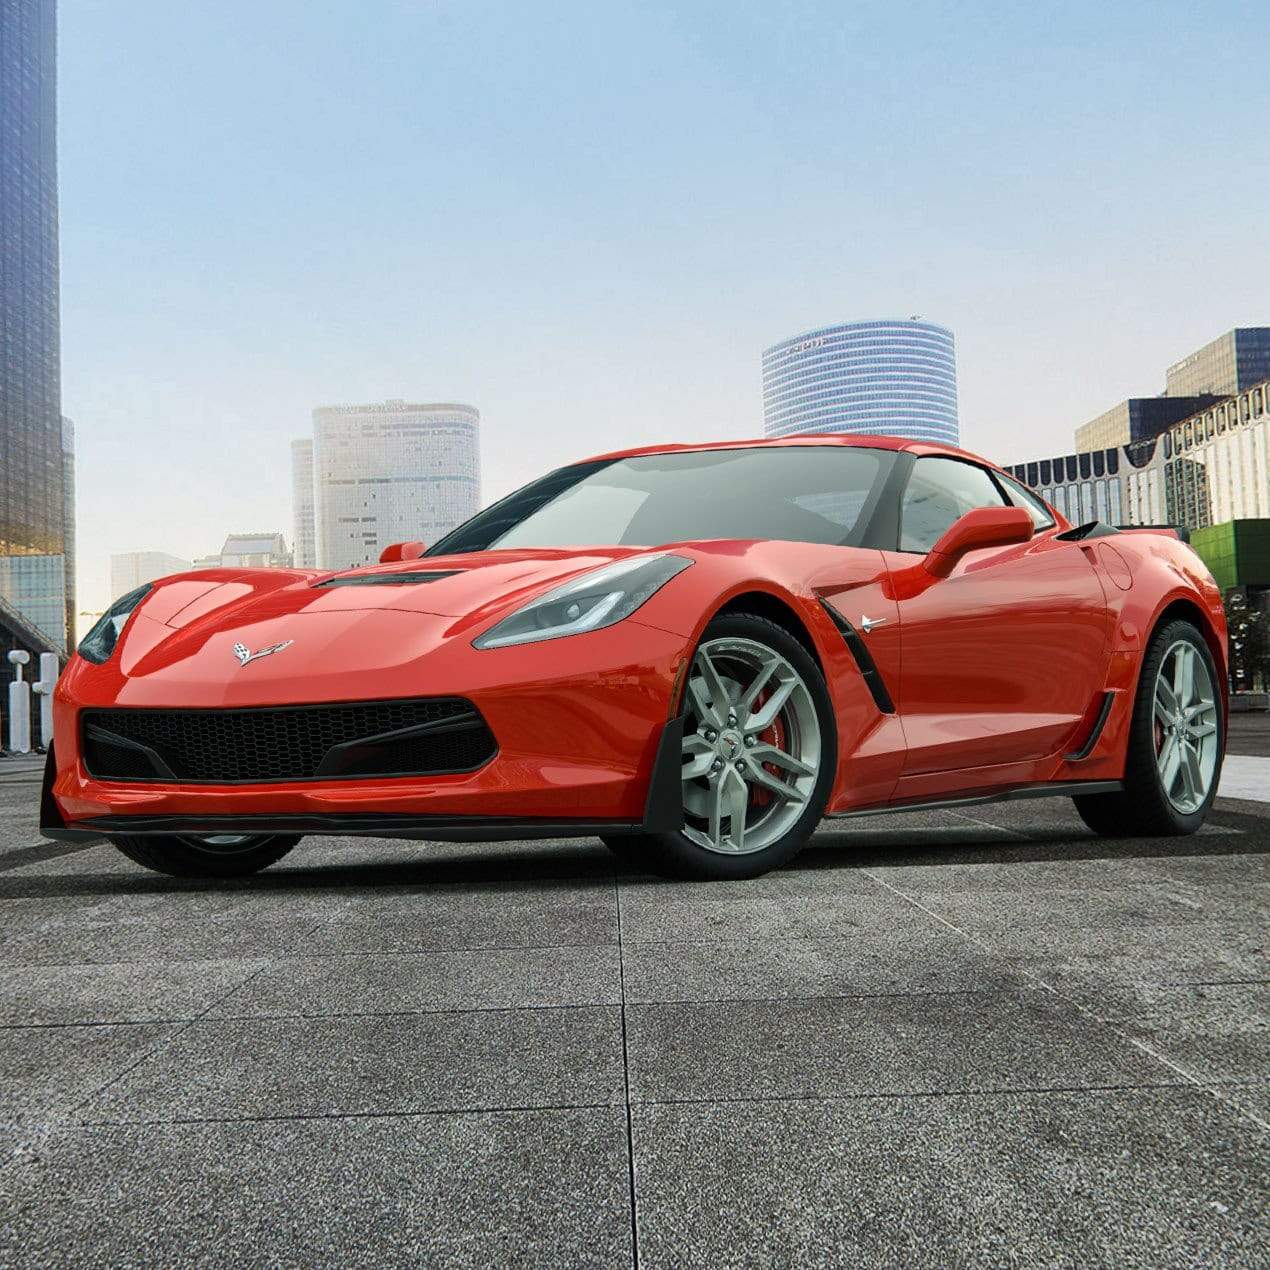 ACS Composite C7 Corvette Stingray Coupe Rear Widebody Conversion Kit with Z06 Scoop, SKU 45-4-073